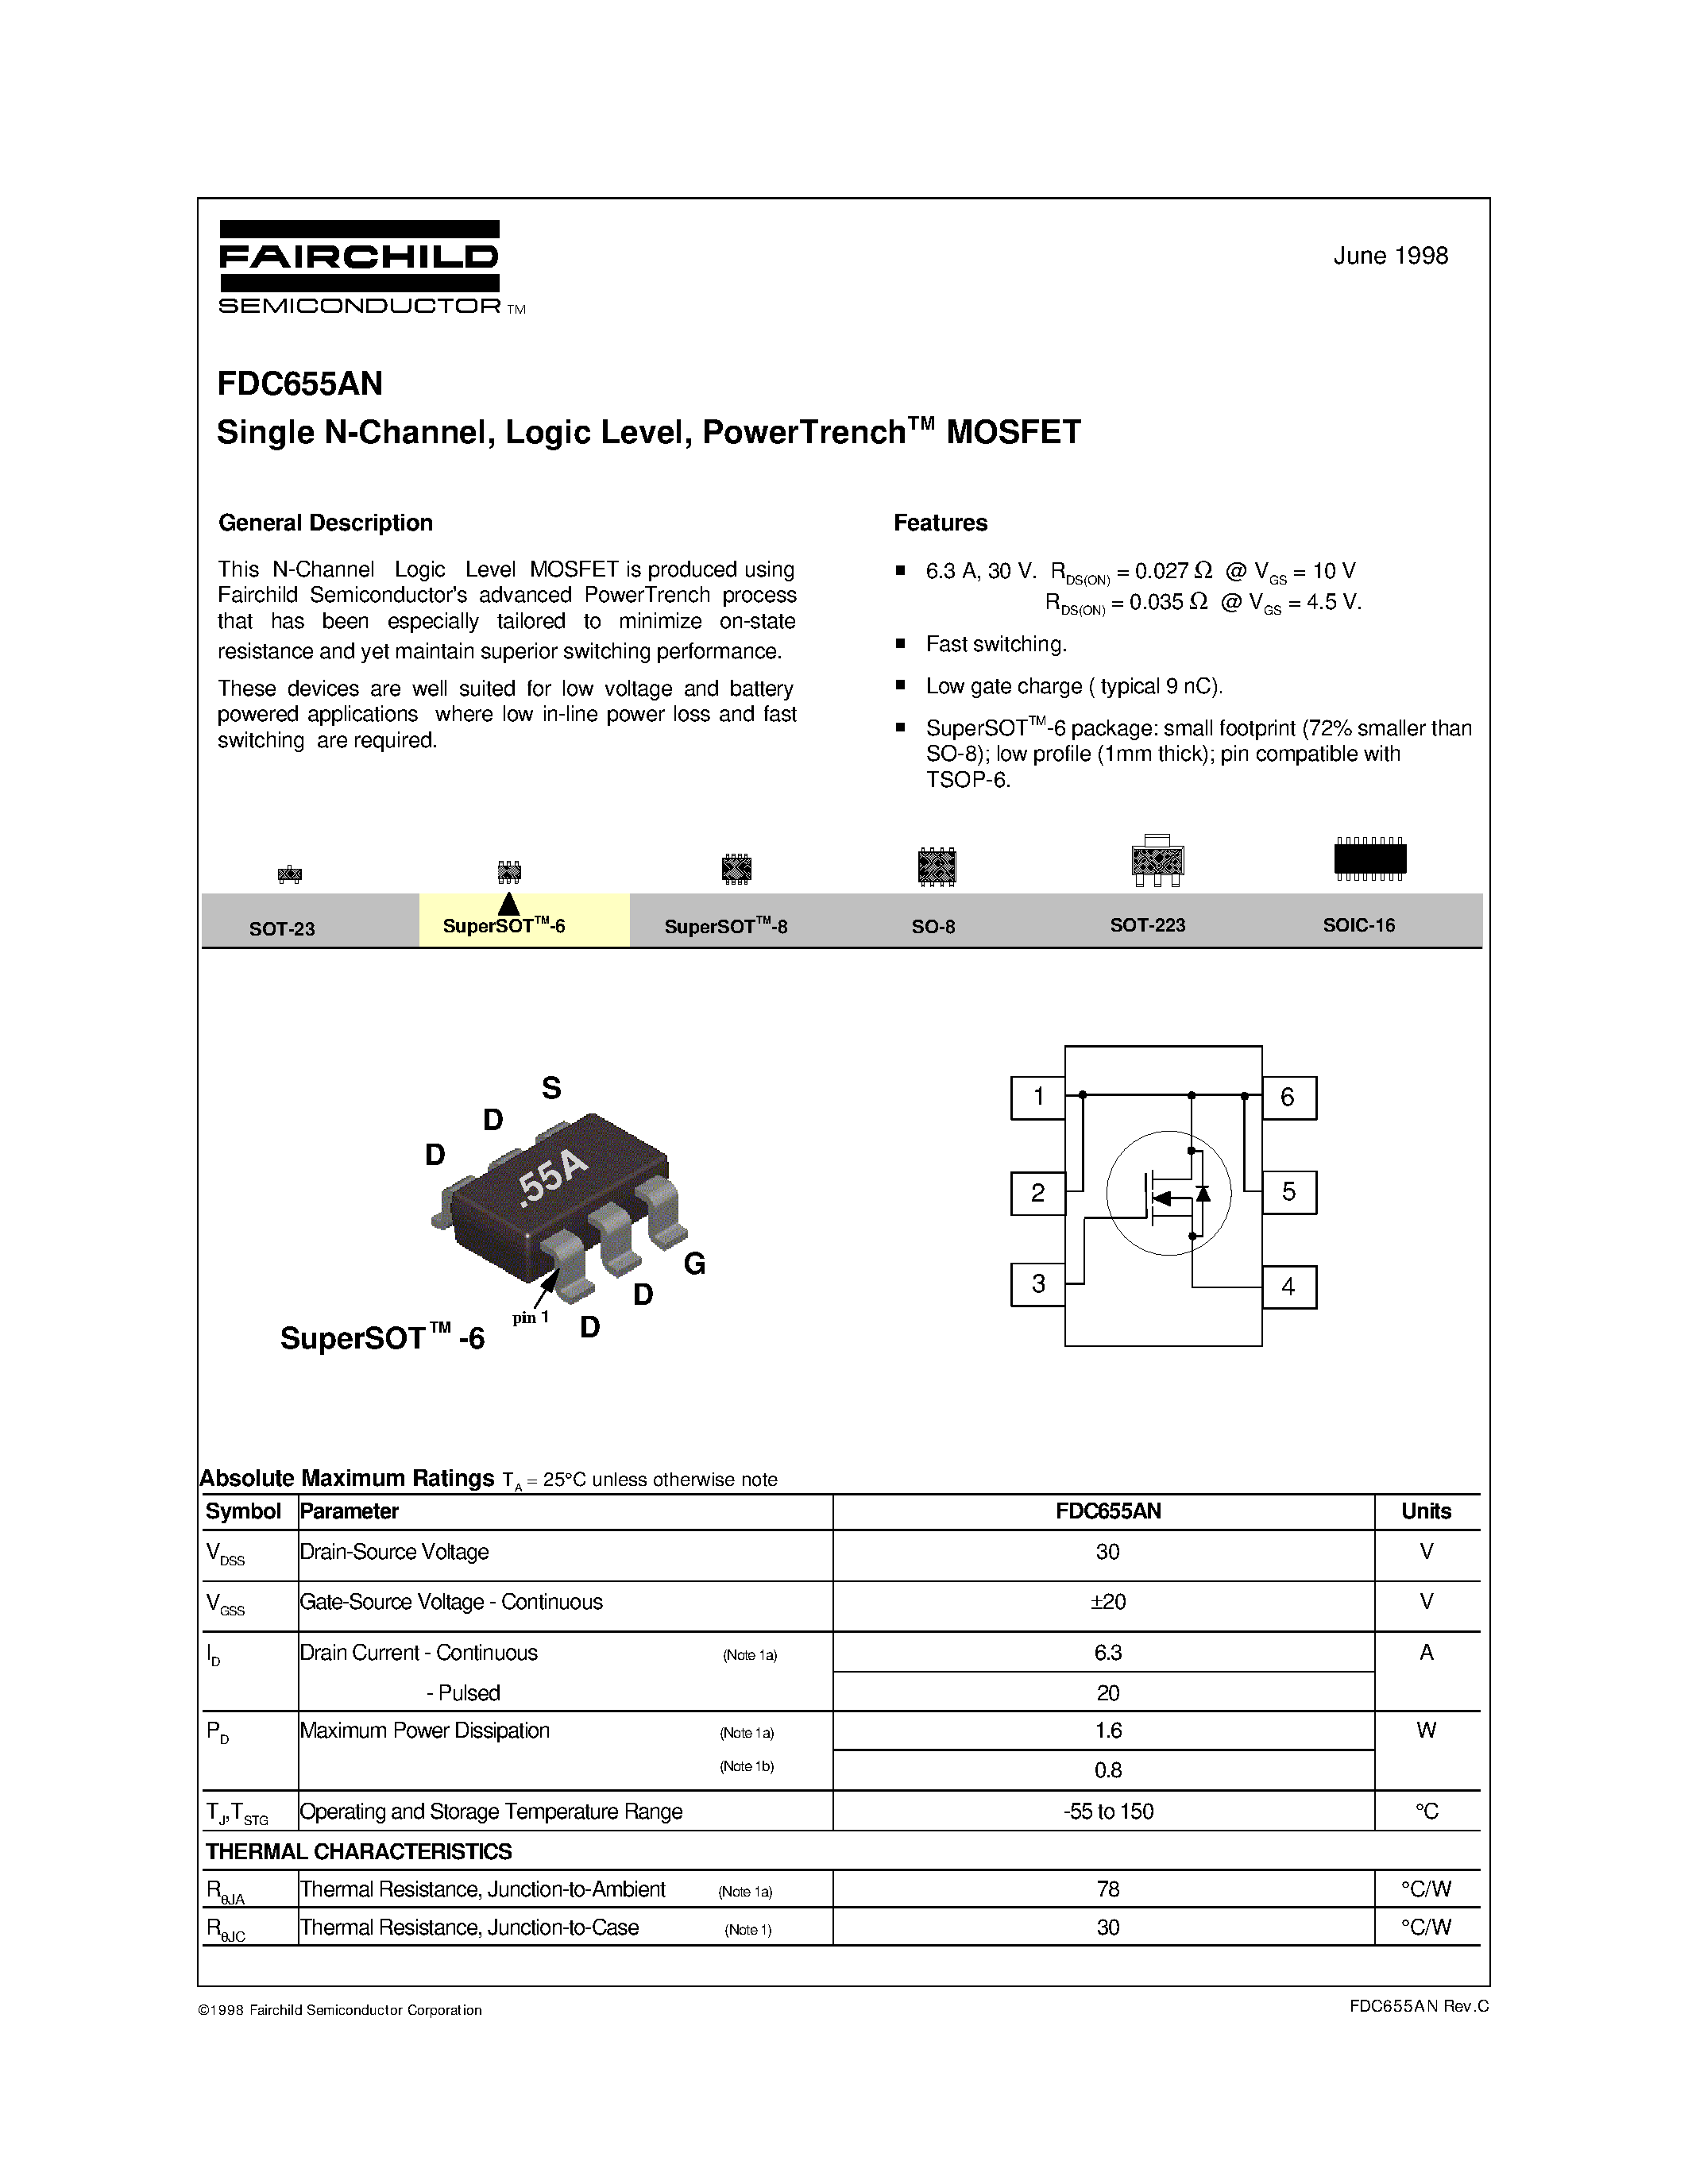 Даташит FDC655AN - Single N-Channel/ Logic Level/ PowerTrenchTM MOSFET страница 1